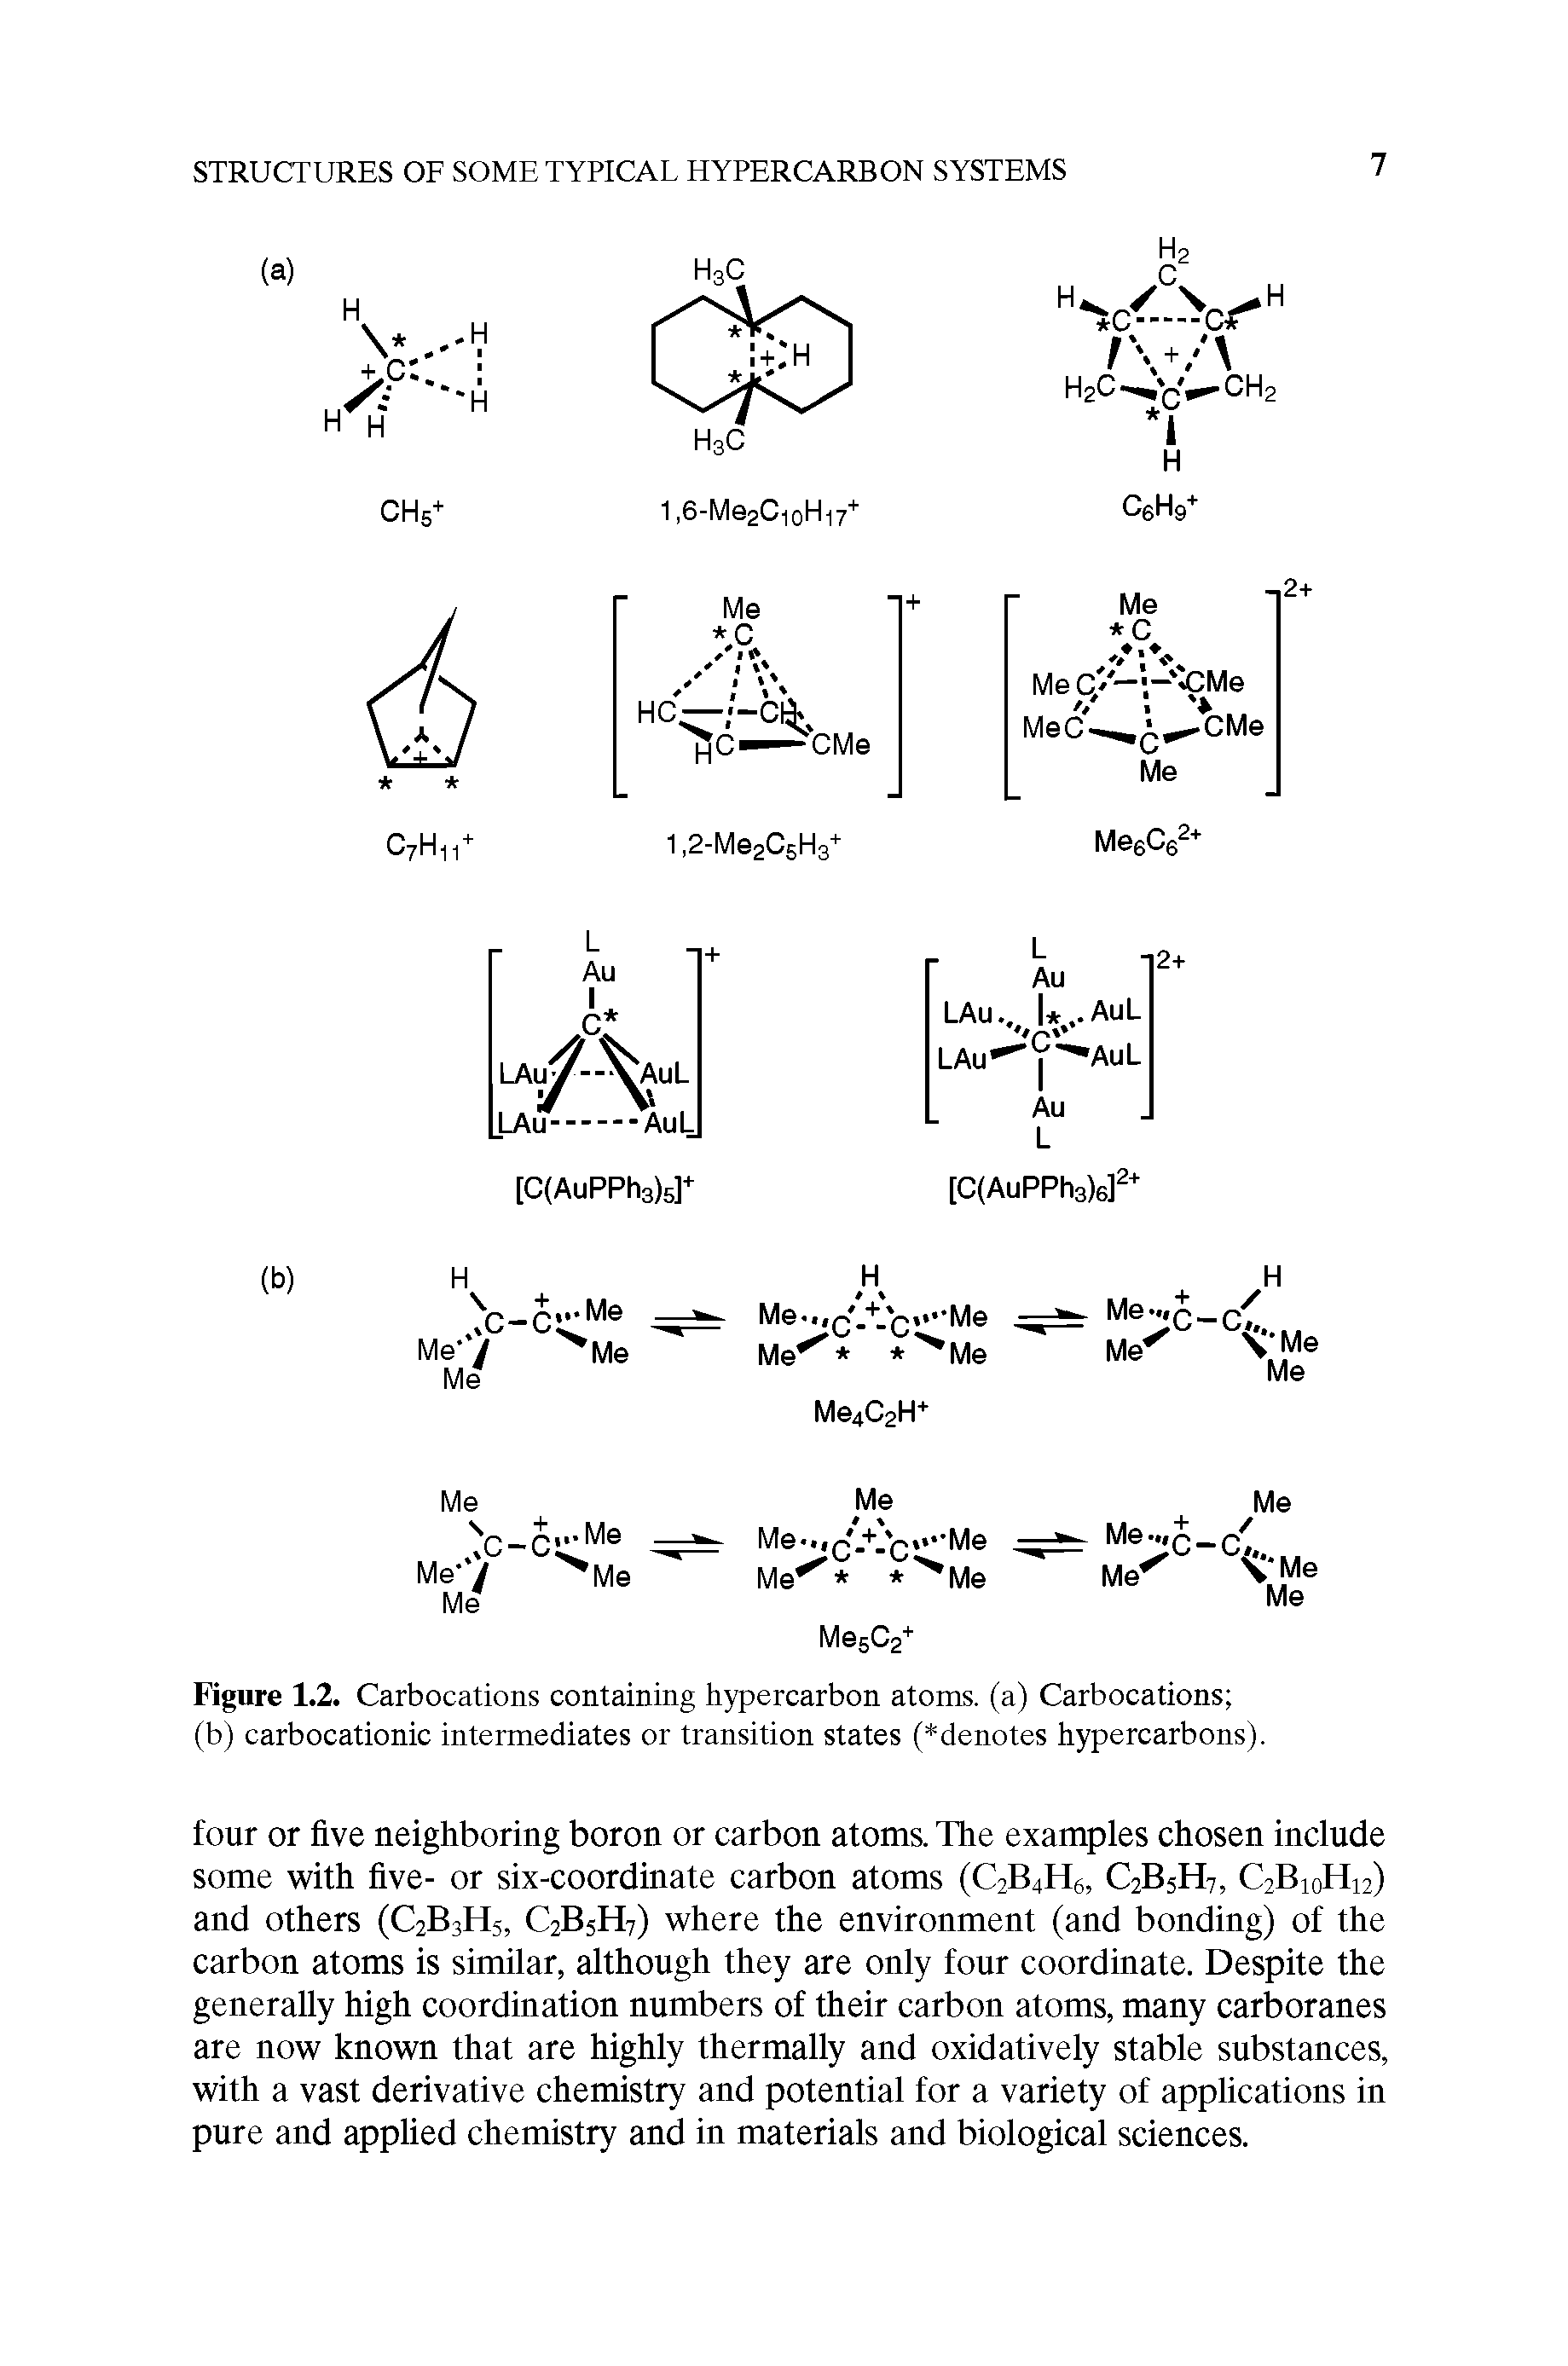 Figure 1.2. Carbocations containing hypercarbon atoms, (a) Carbocations (b) carbocationic intermediates or transition states ( denotes hypercarbons).